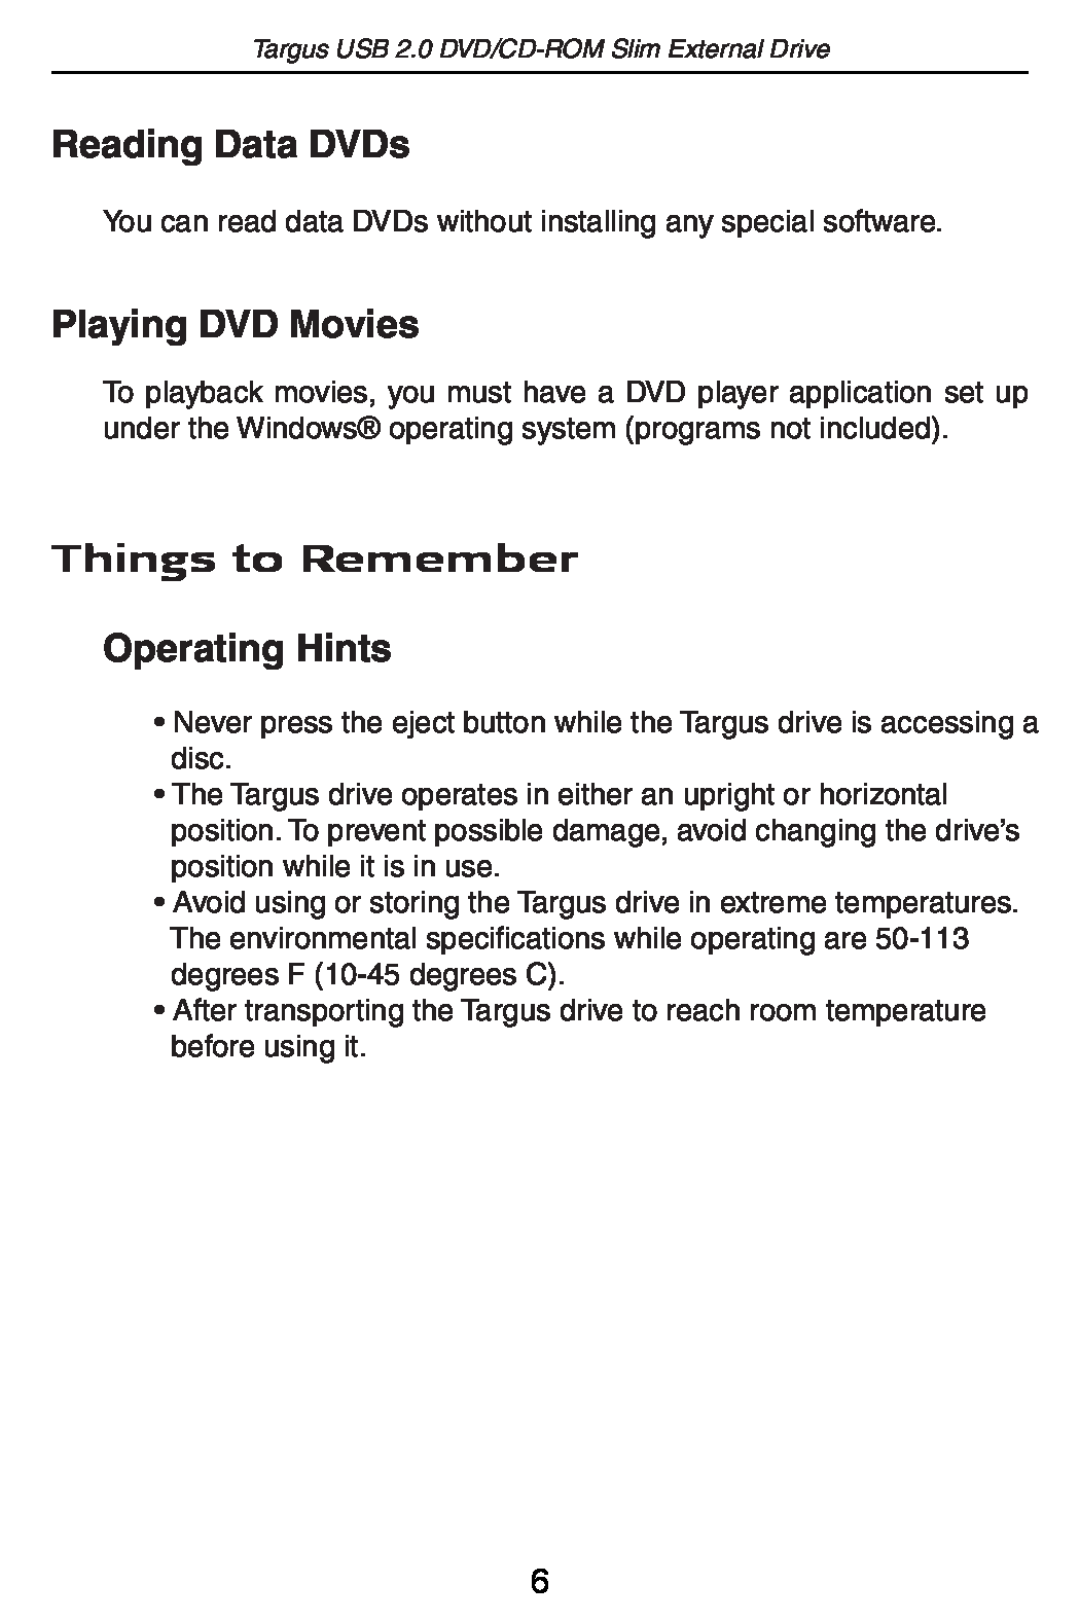 Targus PA410 specifications Reading Data DVDs, Playing DVD Movies, Things to Remember, Operating Hints 